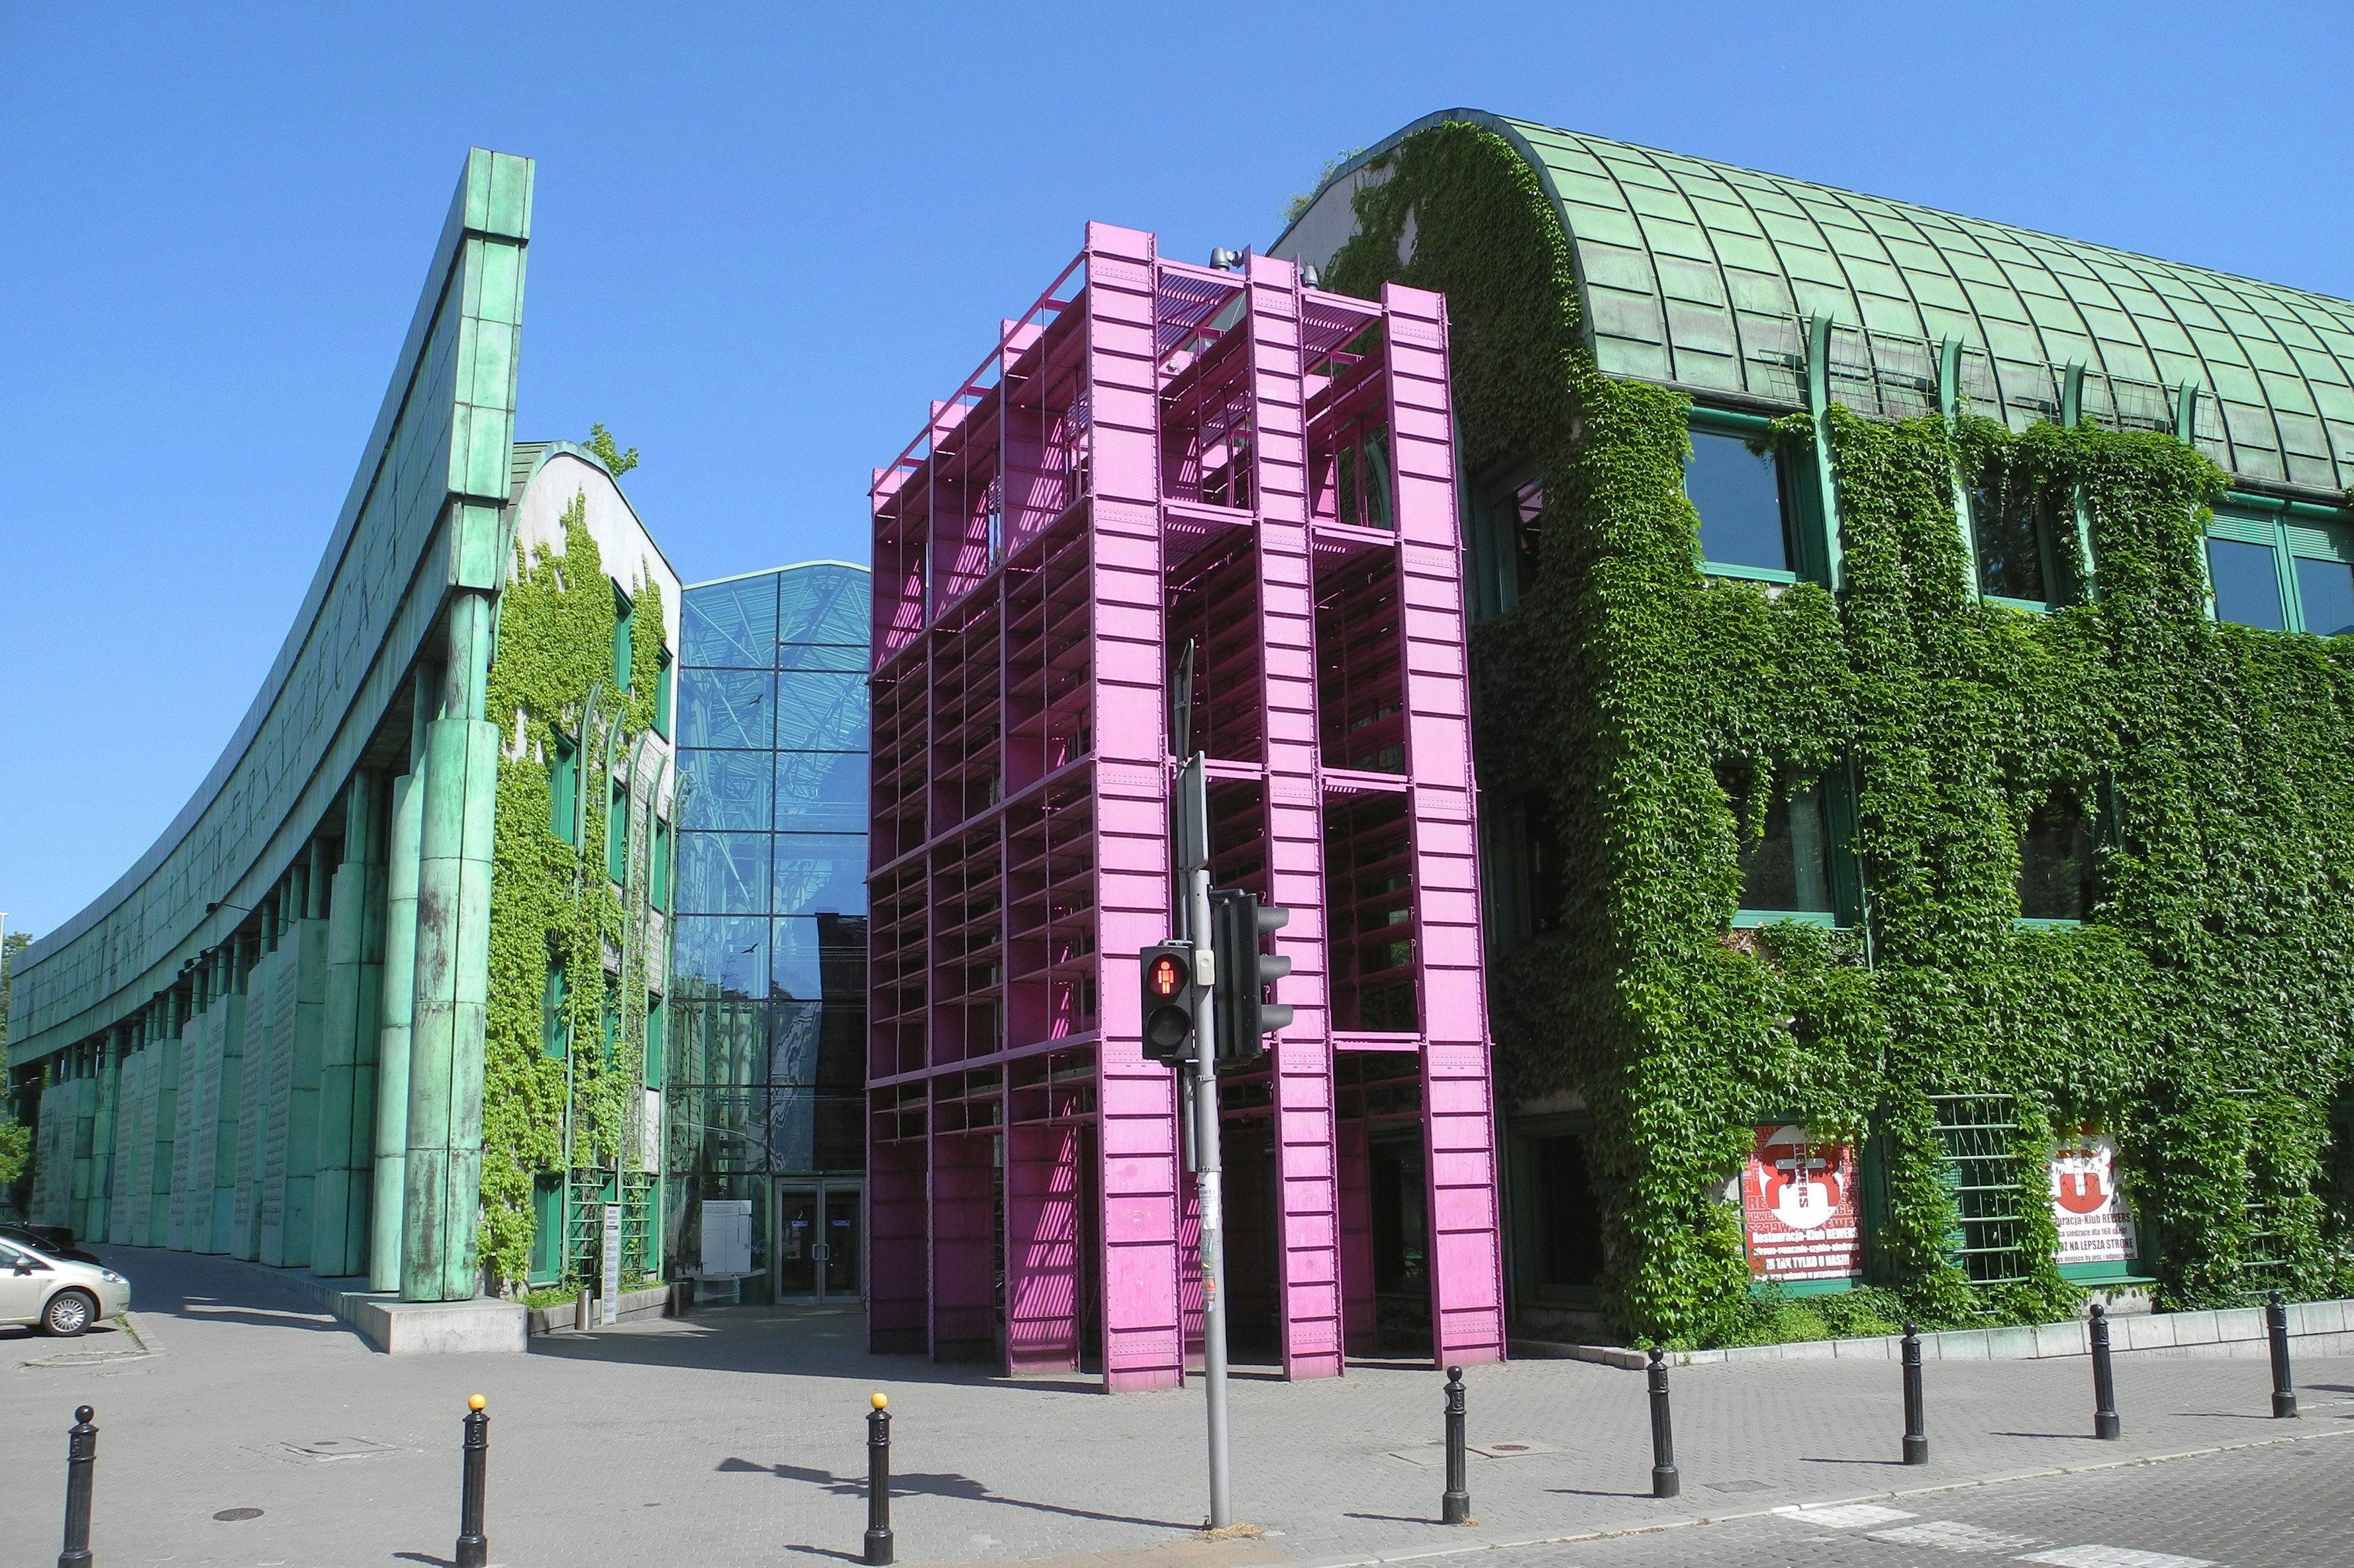 A gren curved wall made up of several panels meets a grey curved section covered in ivy, which in turn abuts a blue glass atrium. In front of the whole building is a pink section that looks almost like scaffolding. 